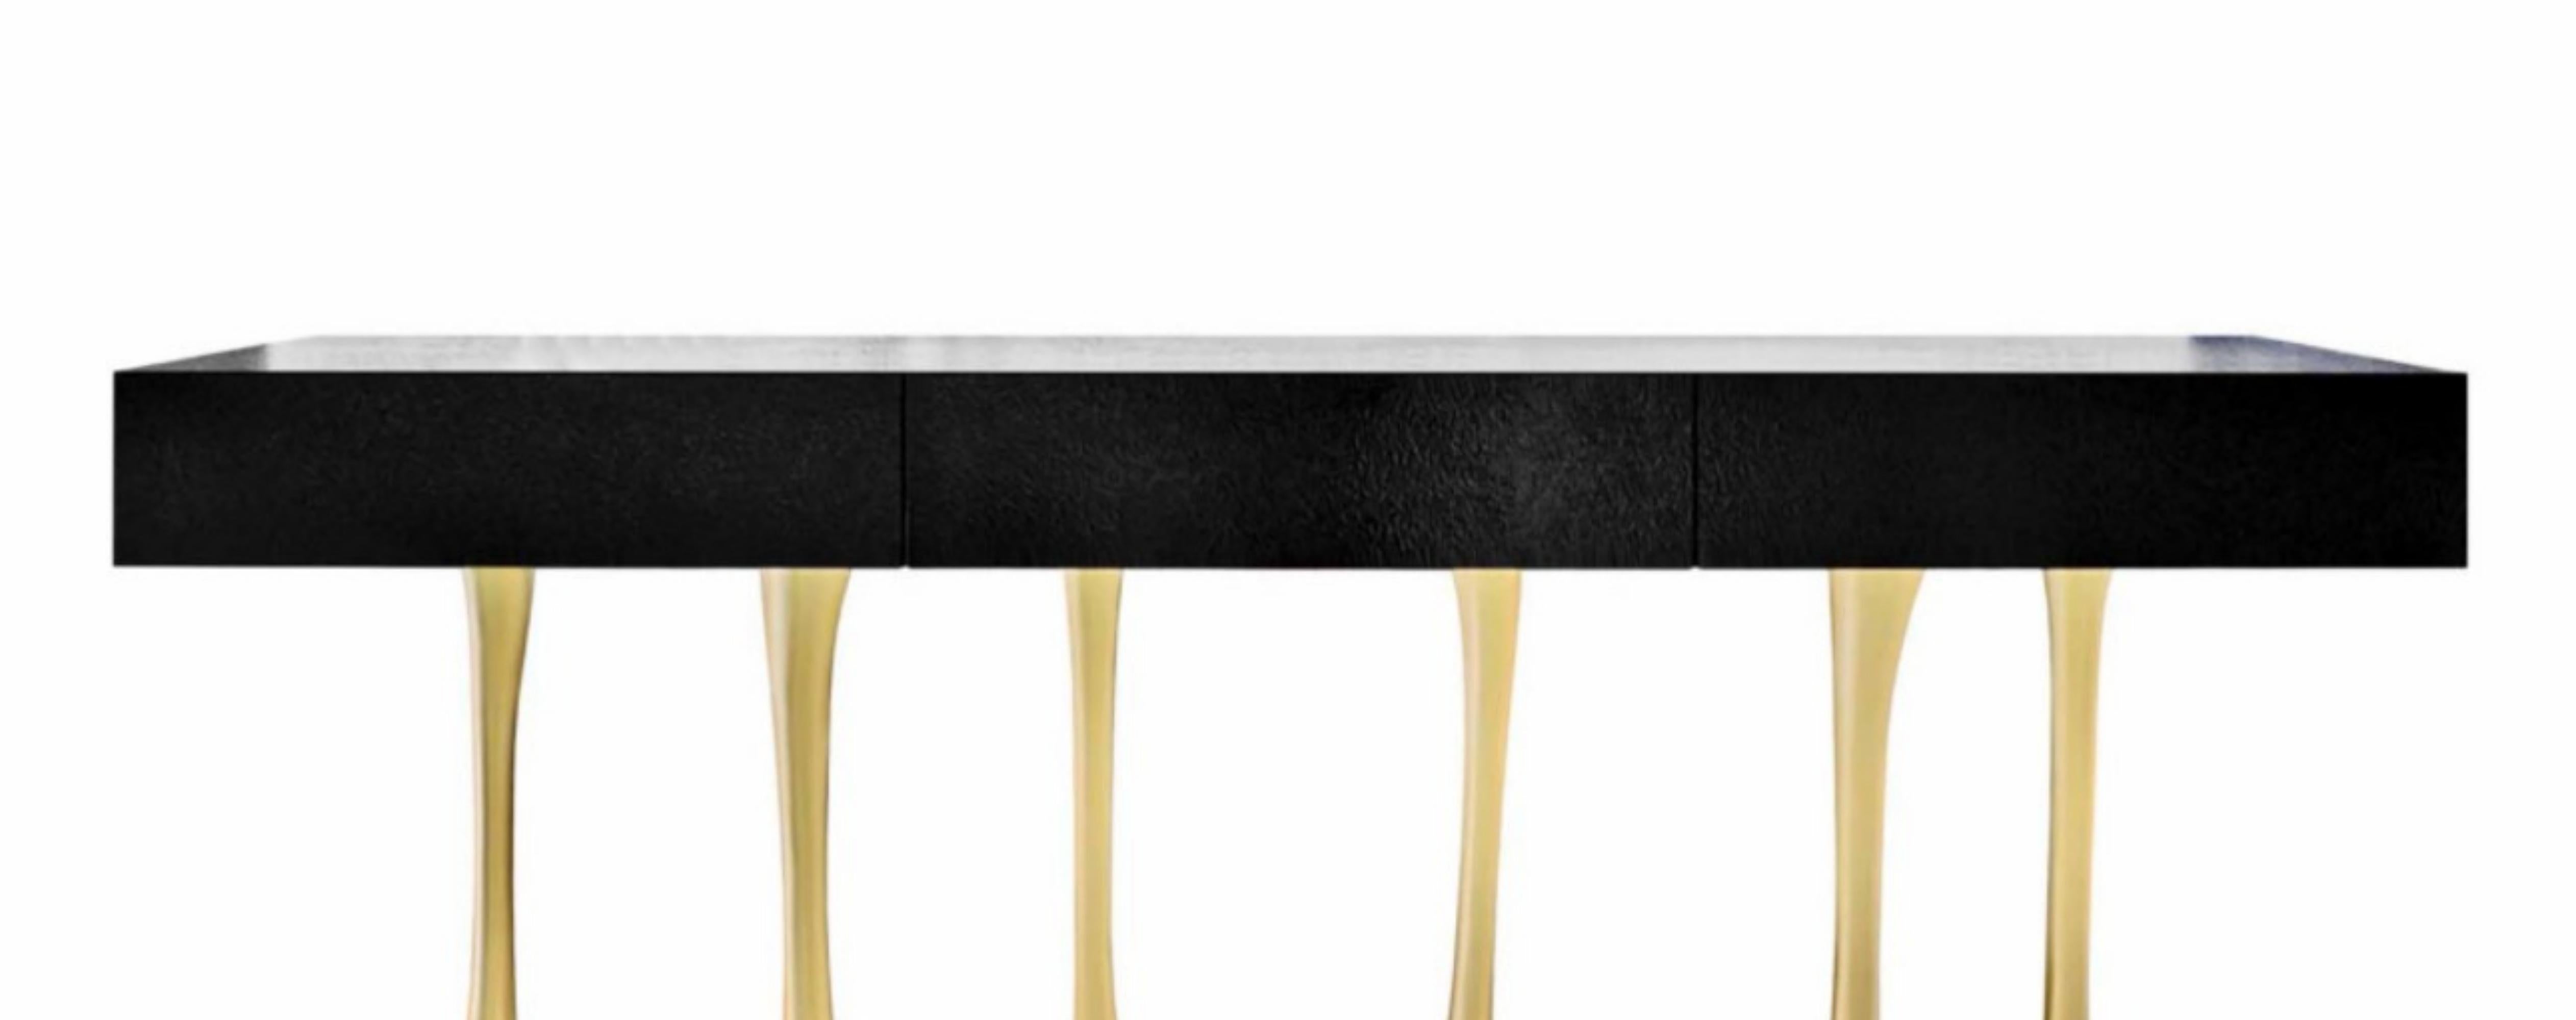 Console

General Information

Dimensions (cm): 210 x 45 x 90


Materials and Colors

Structure: Wood reinforced with fiberglass, textured and finished in black high gloss;
Base: Resin reinforced with fiberglass, finished in gold color.

